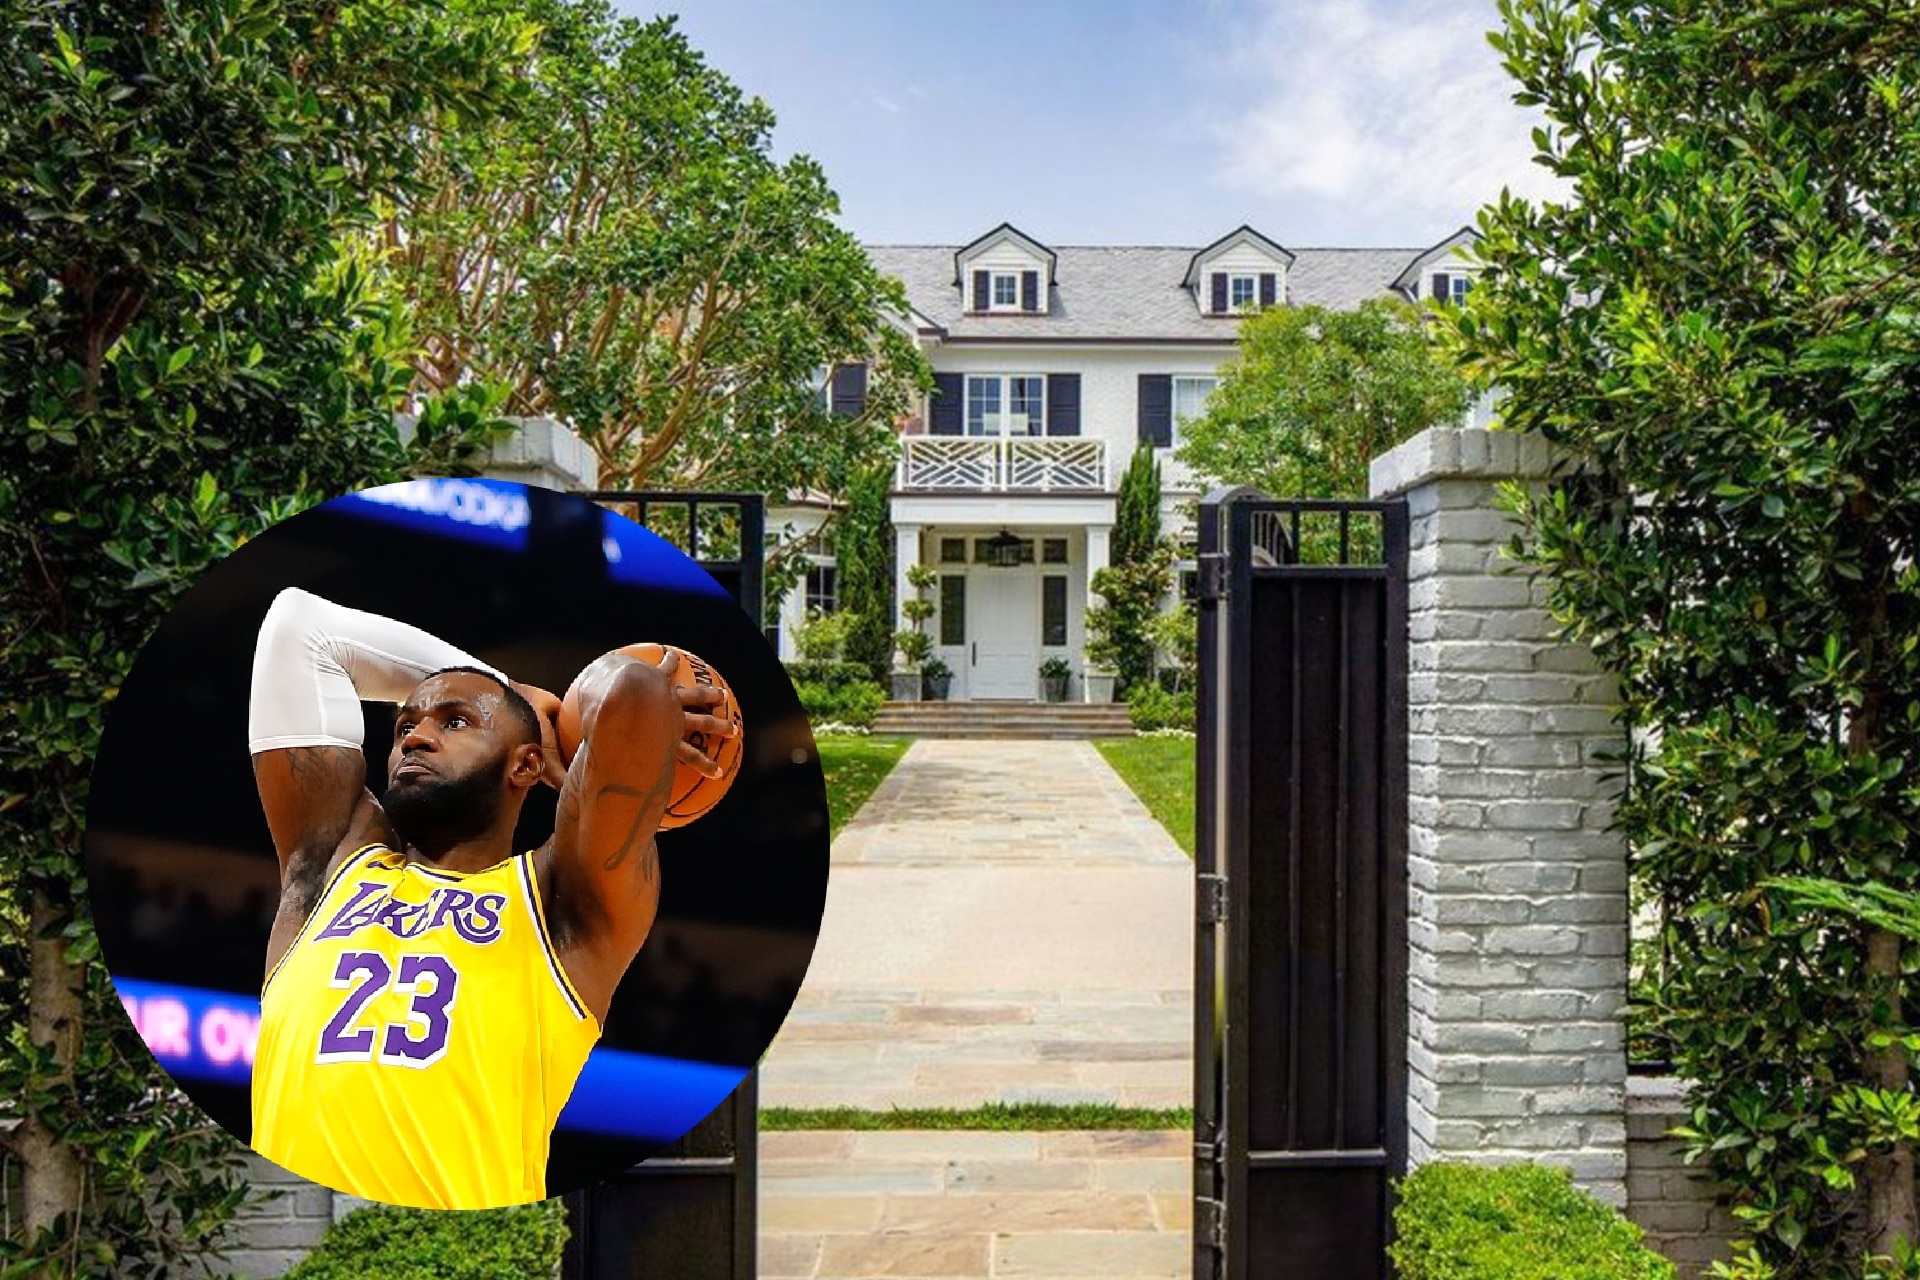 Photos of LeBron James' $23 million mansion in Brentwood, Los Angeles